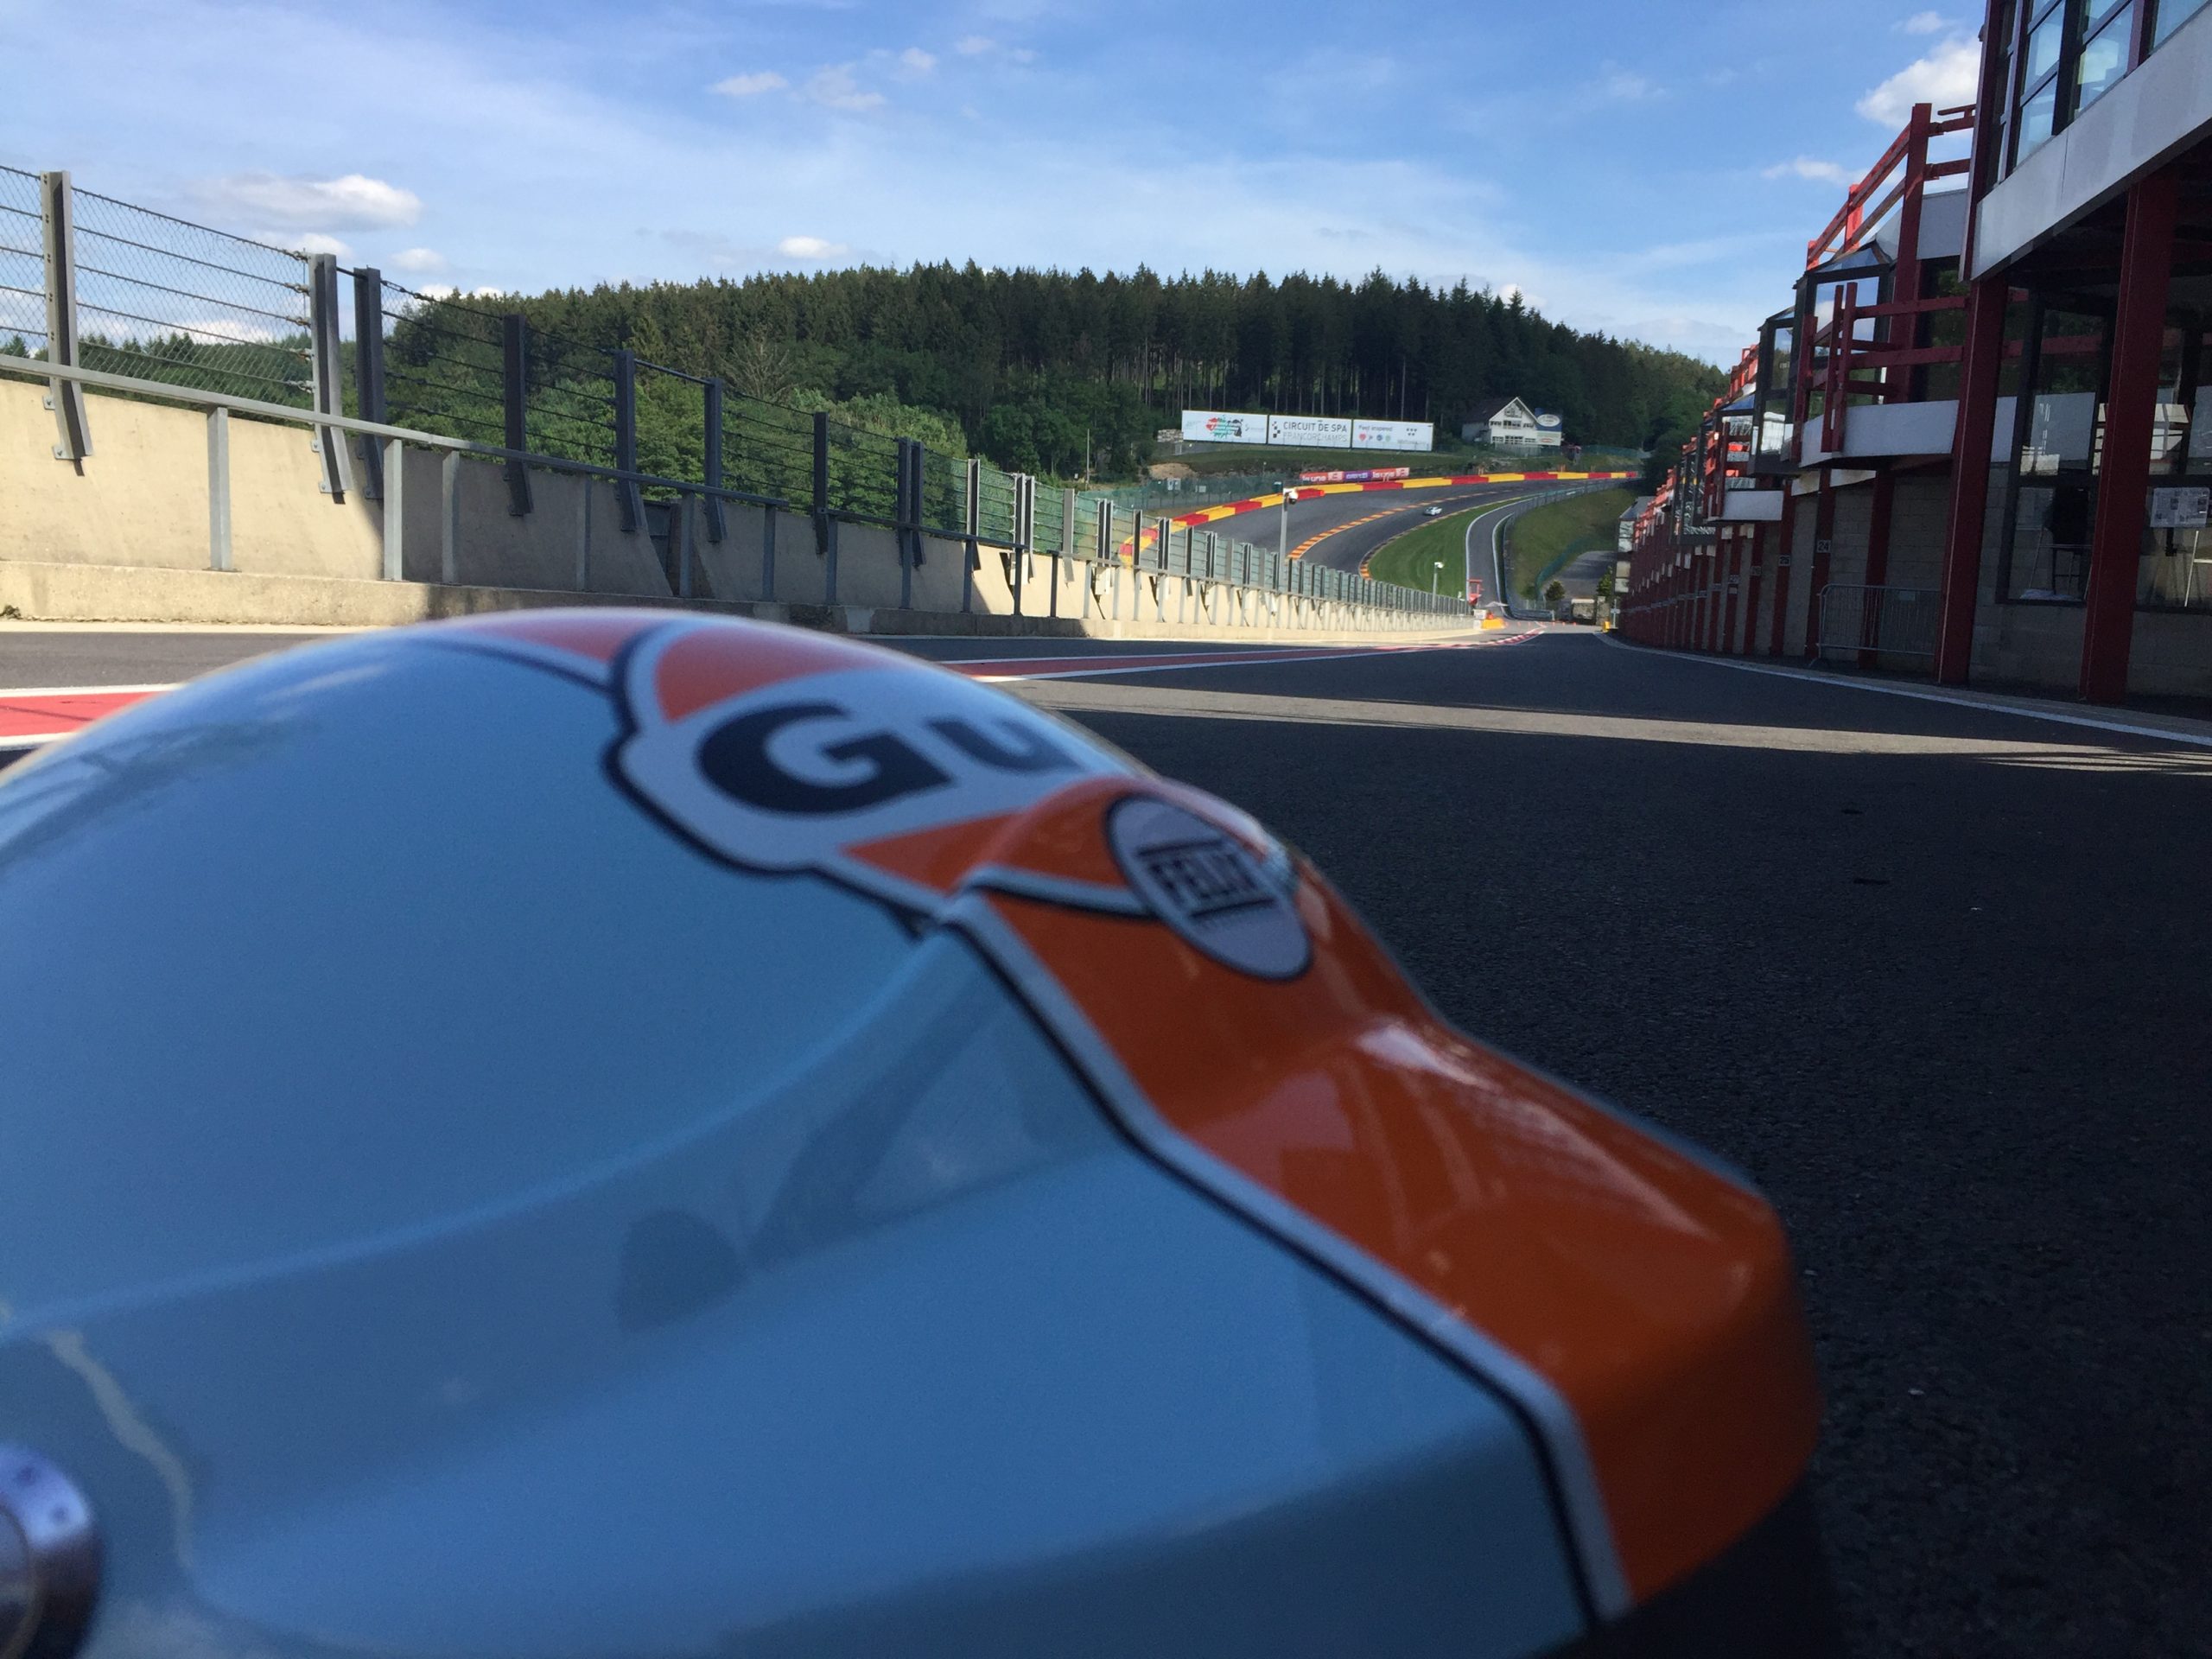 FRANCORCHAMPS WE LOVE CURVES